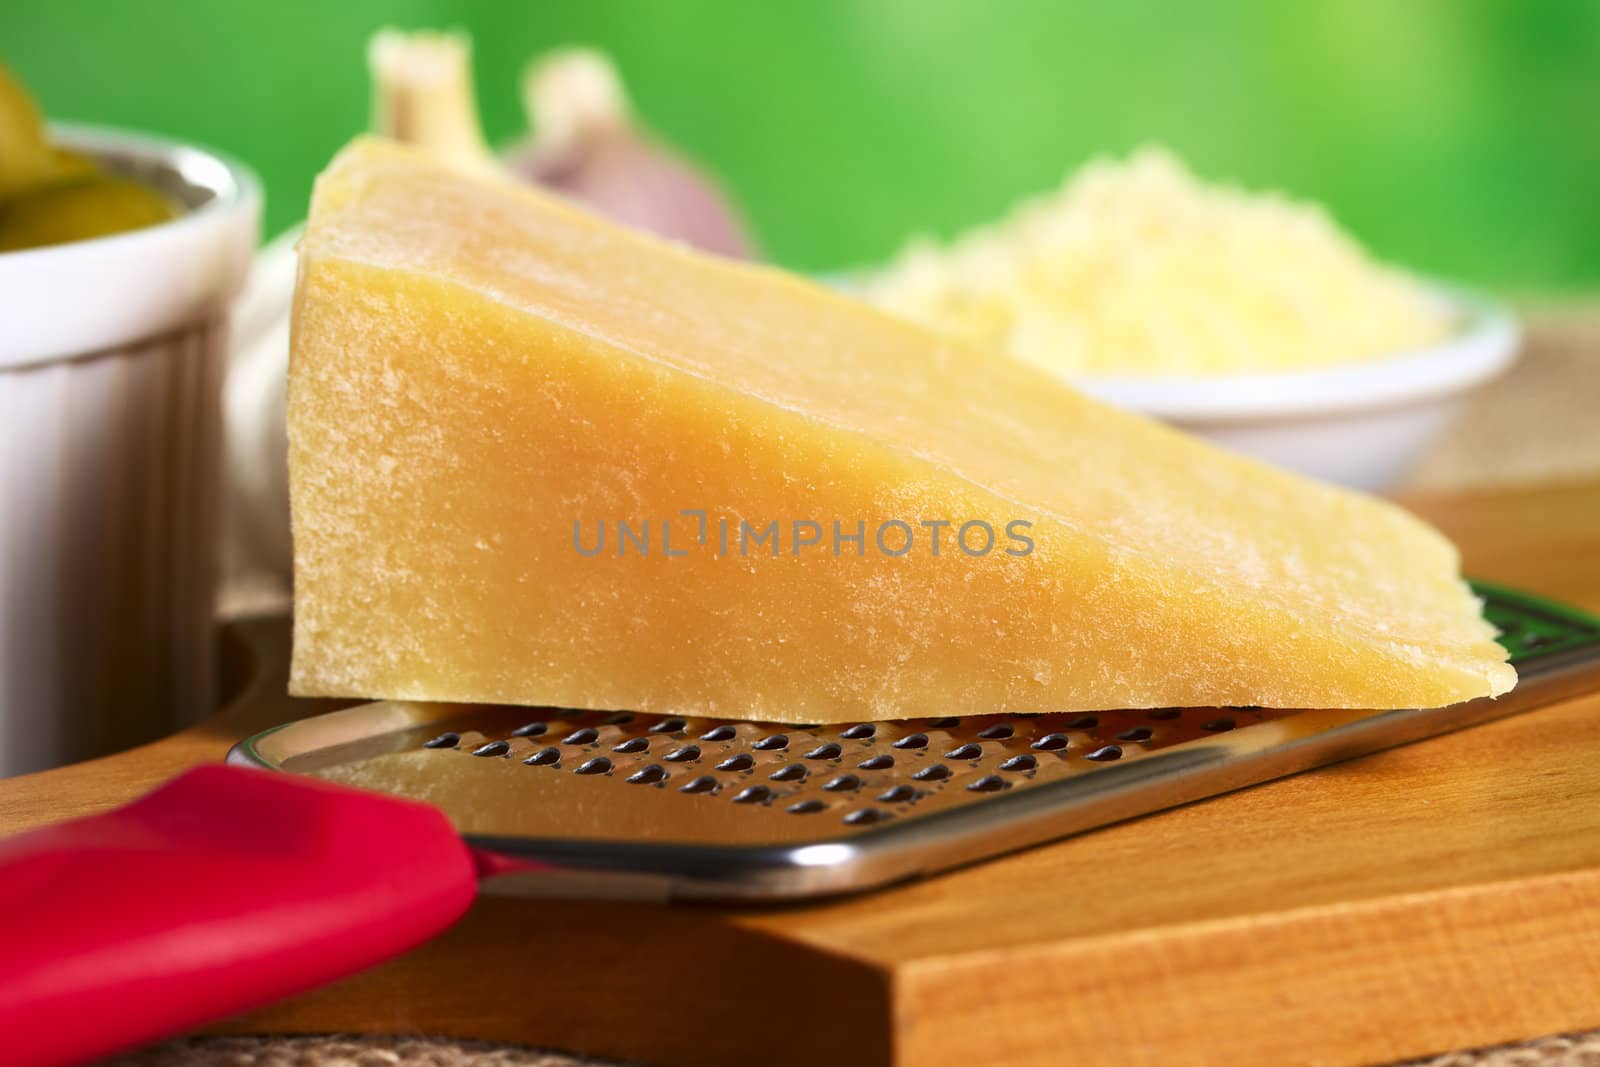 Italian hard cheese with rasp on wooden board (Selective Focus, Focus on the end of the cheese on the right)